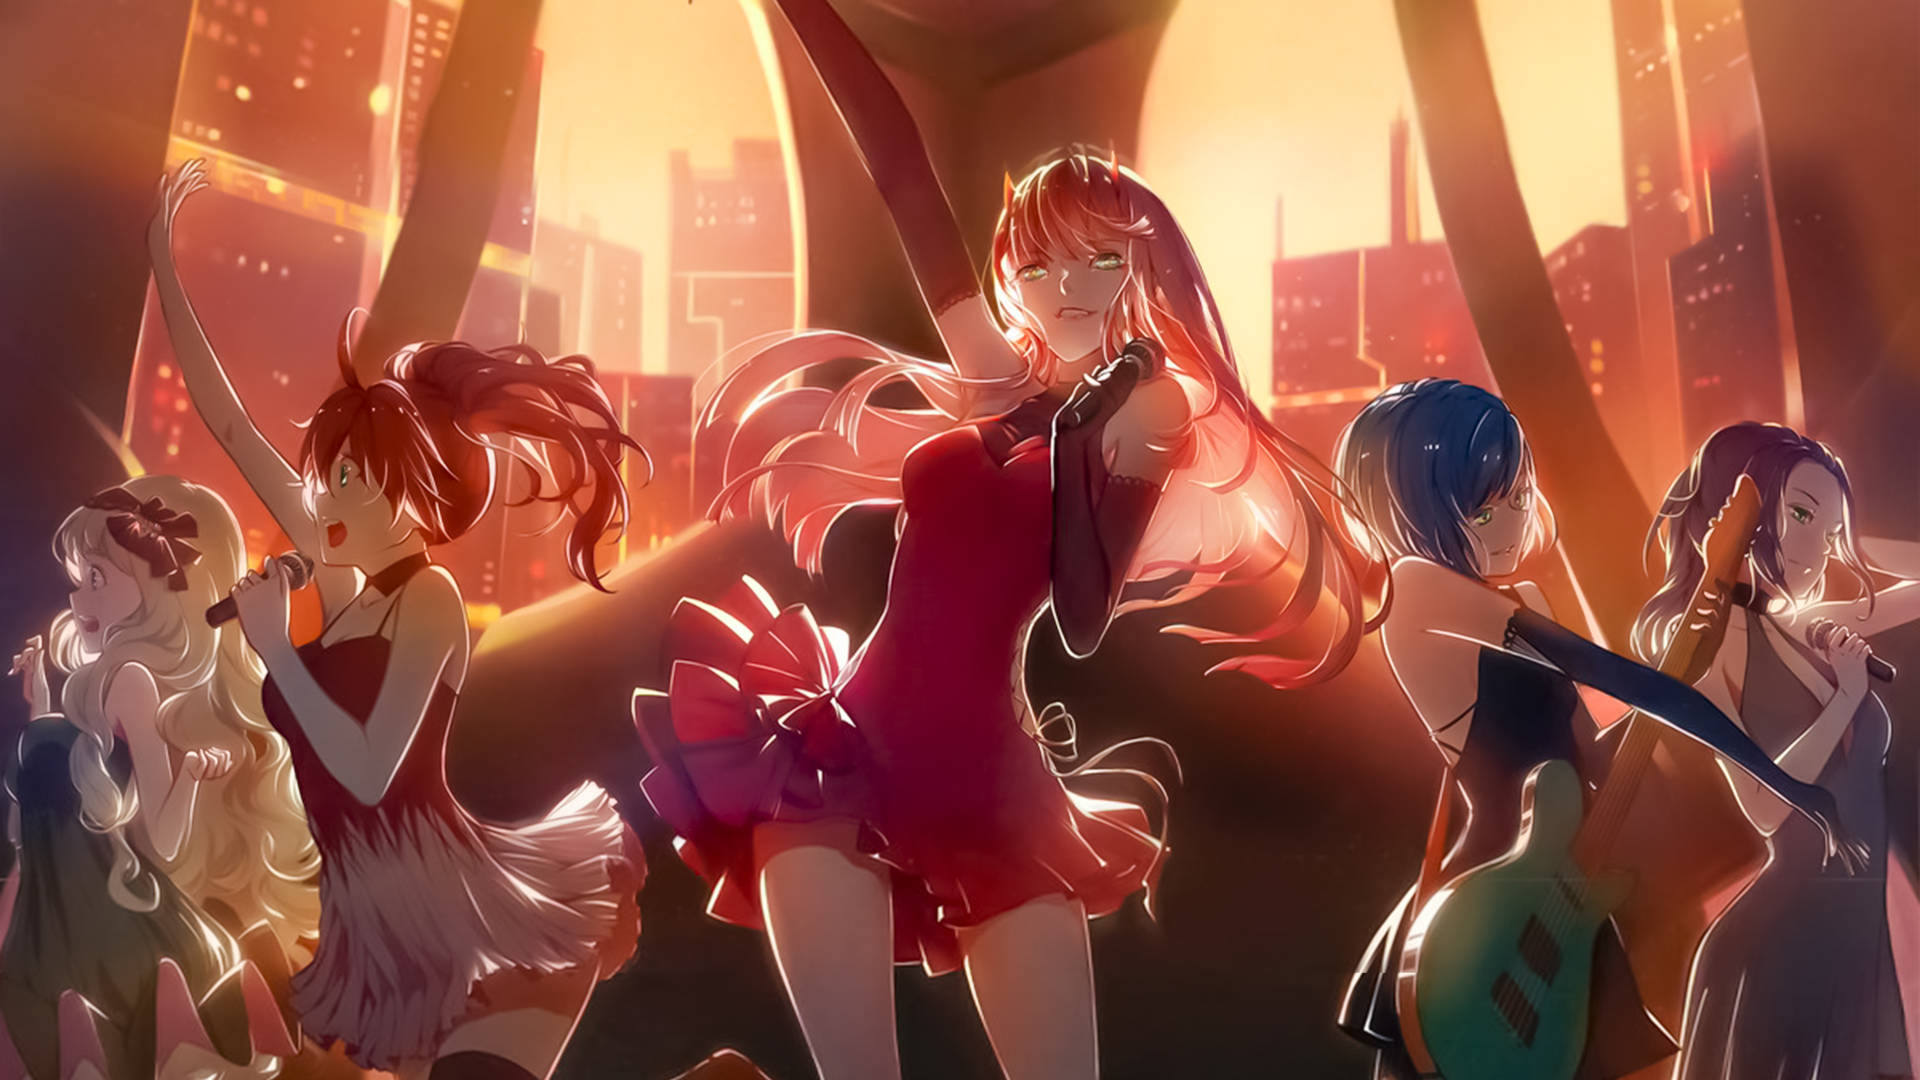 Energetic Anime Girl Band Dancing On Dreamy Stage Background